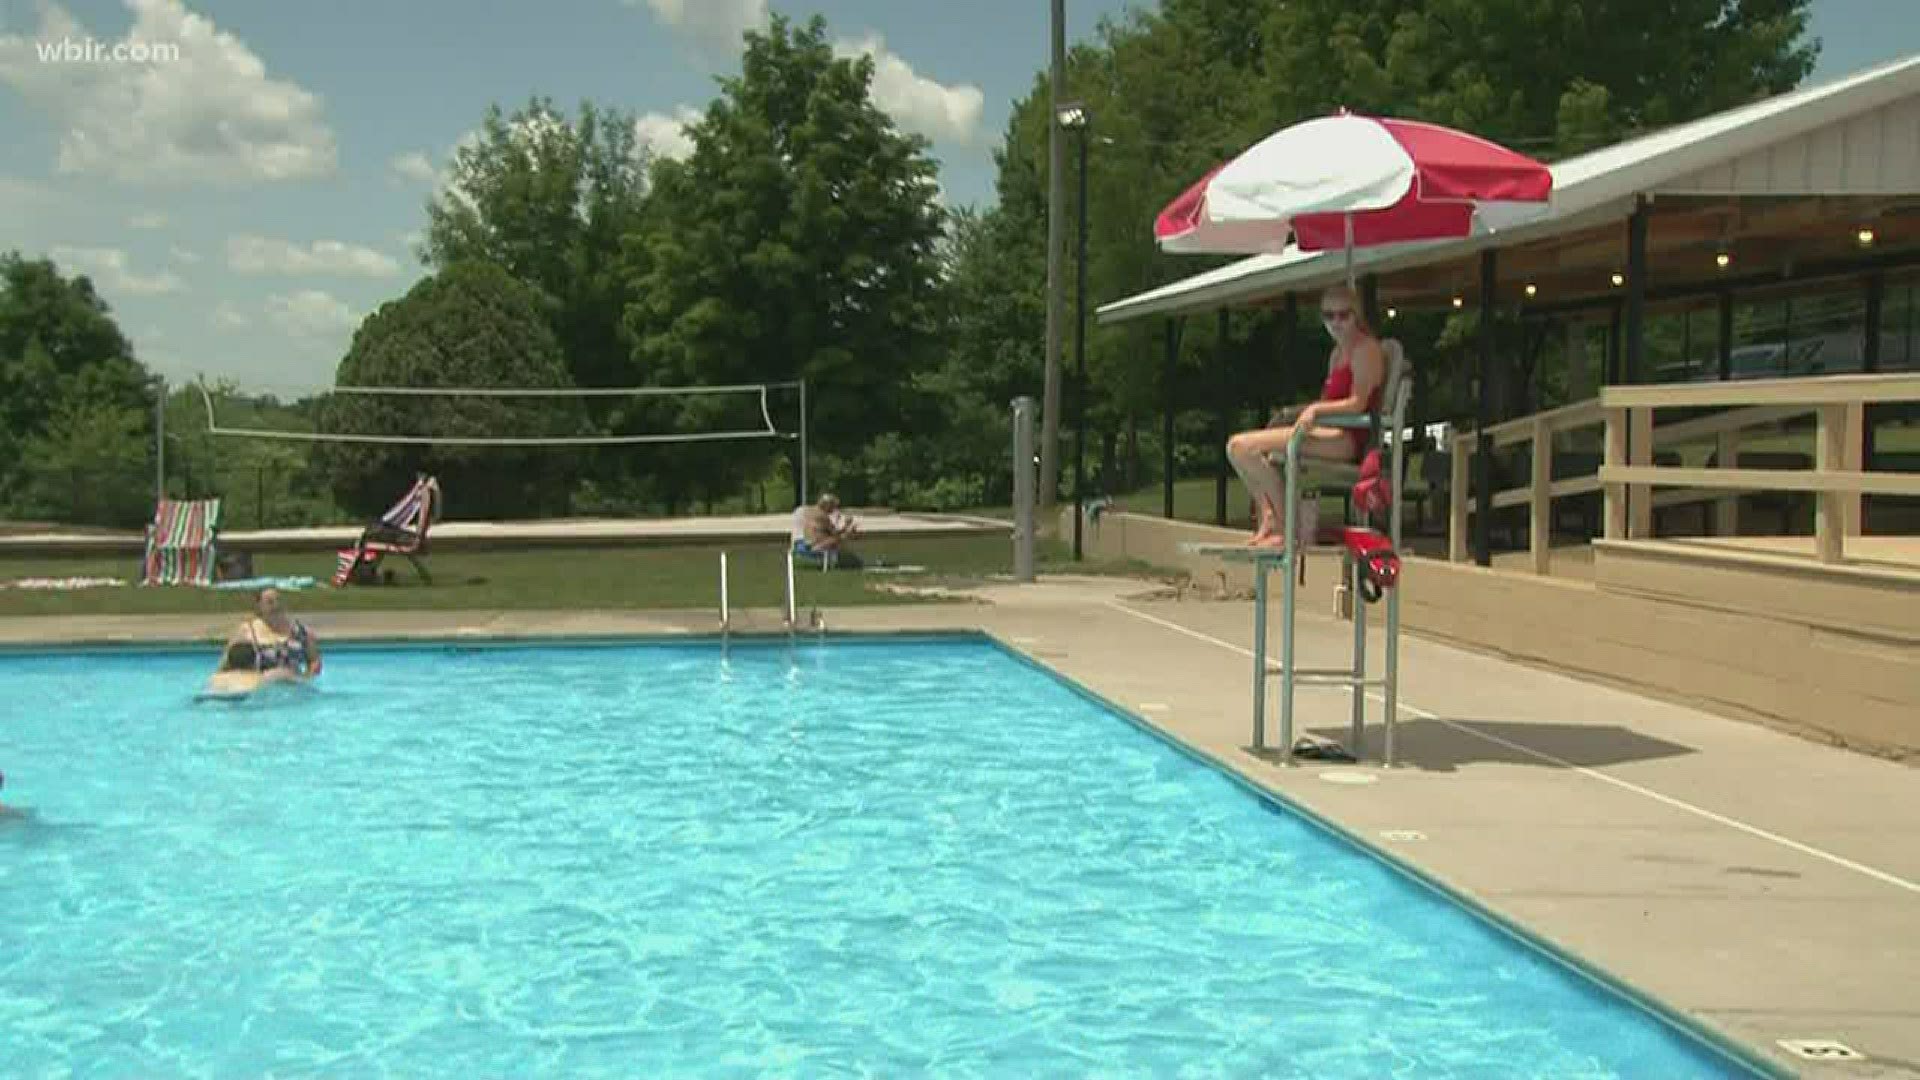 About one in five people who die from drowning in the U.S. are children 14 and younger, according to the CDC. Ages 1 to 4 have the highest drowning rates.